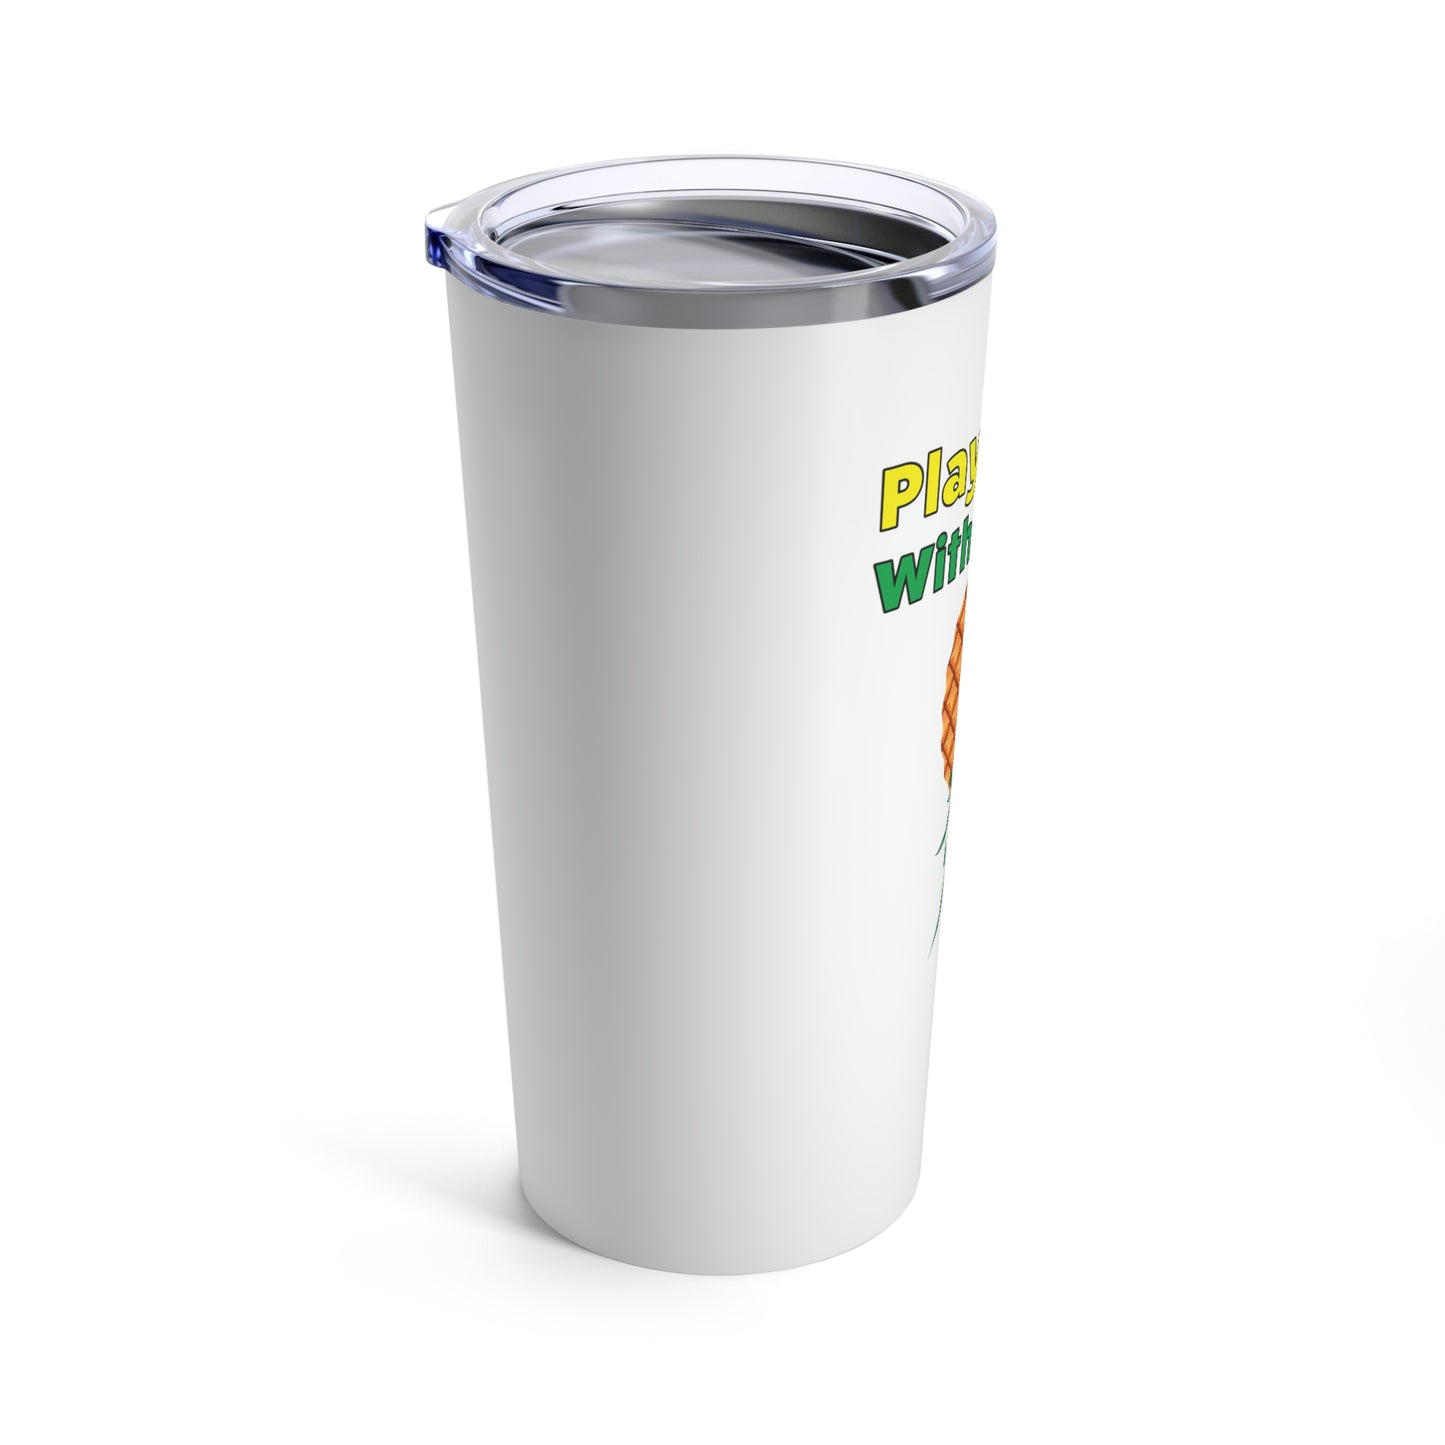 Plays Well With Others–Tumbler 20oz